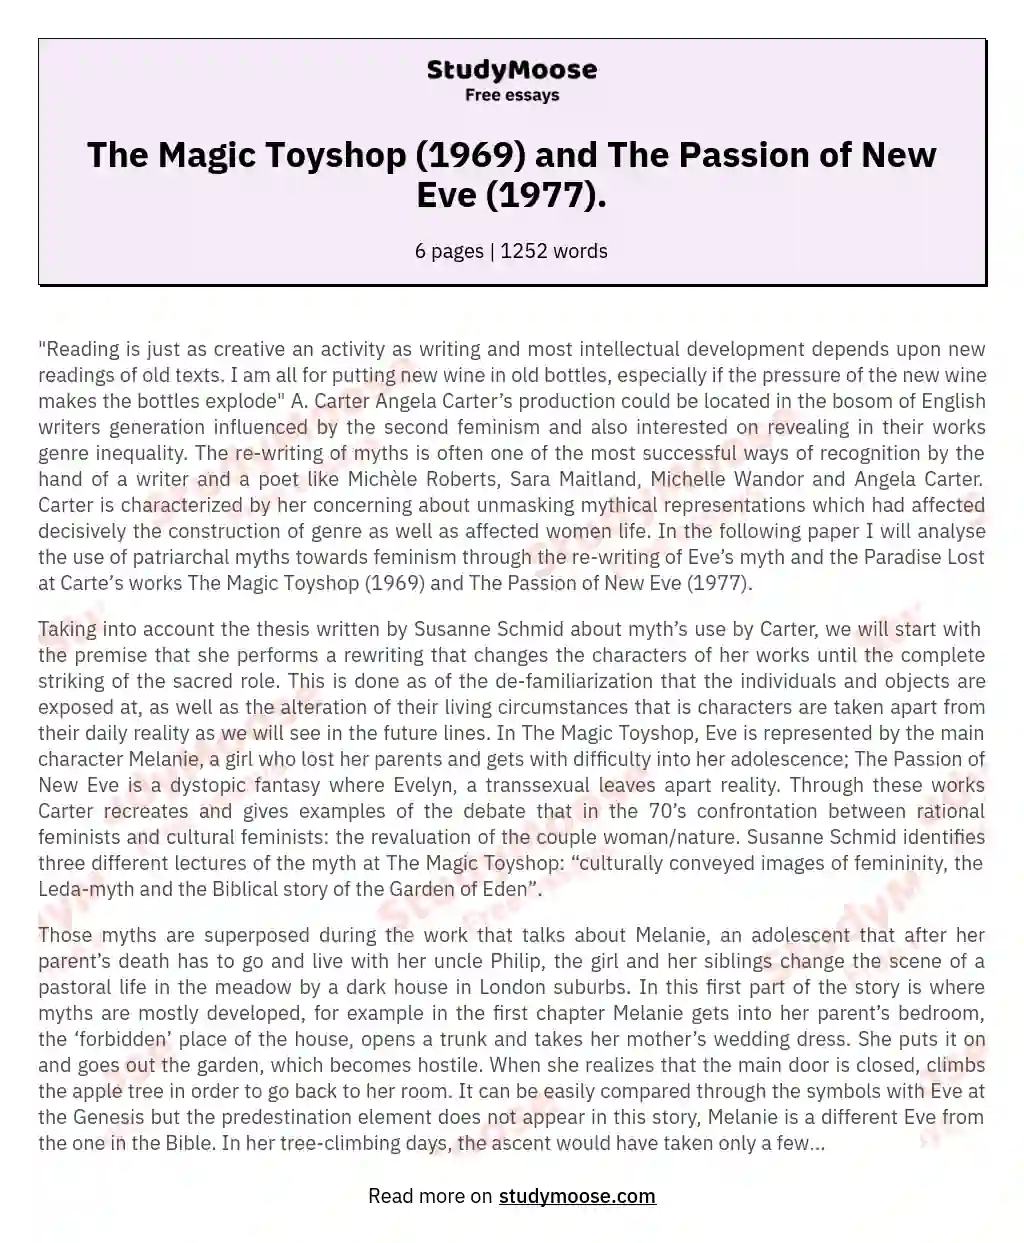 The Magic Toyshop (1969) and The Passion of New Eve (1977). essay